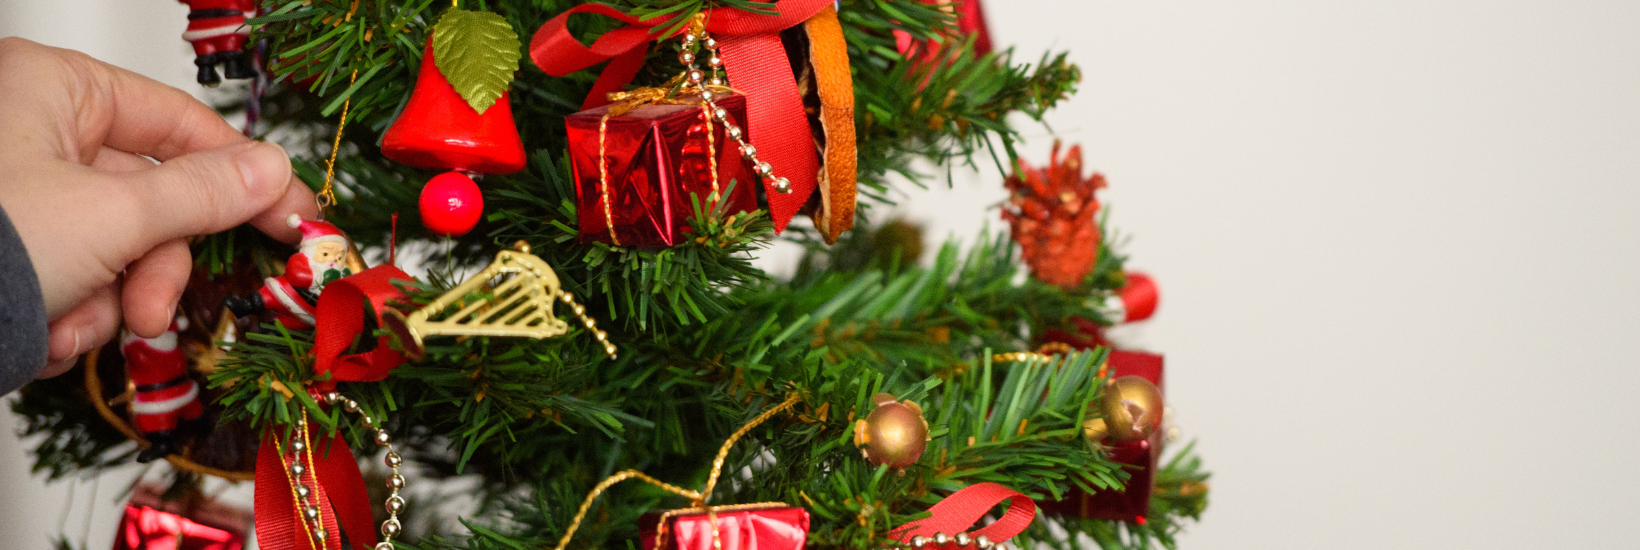 Engage your employees in a Christmas tree decorating contest